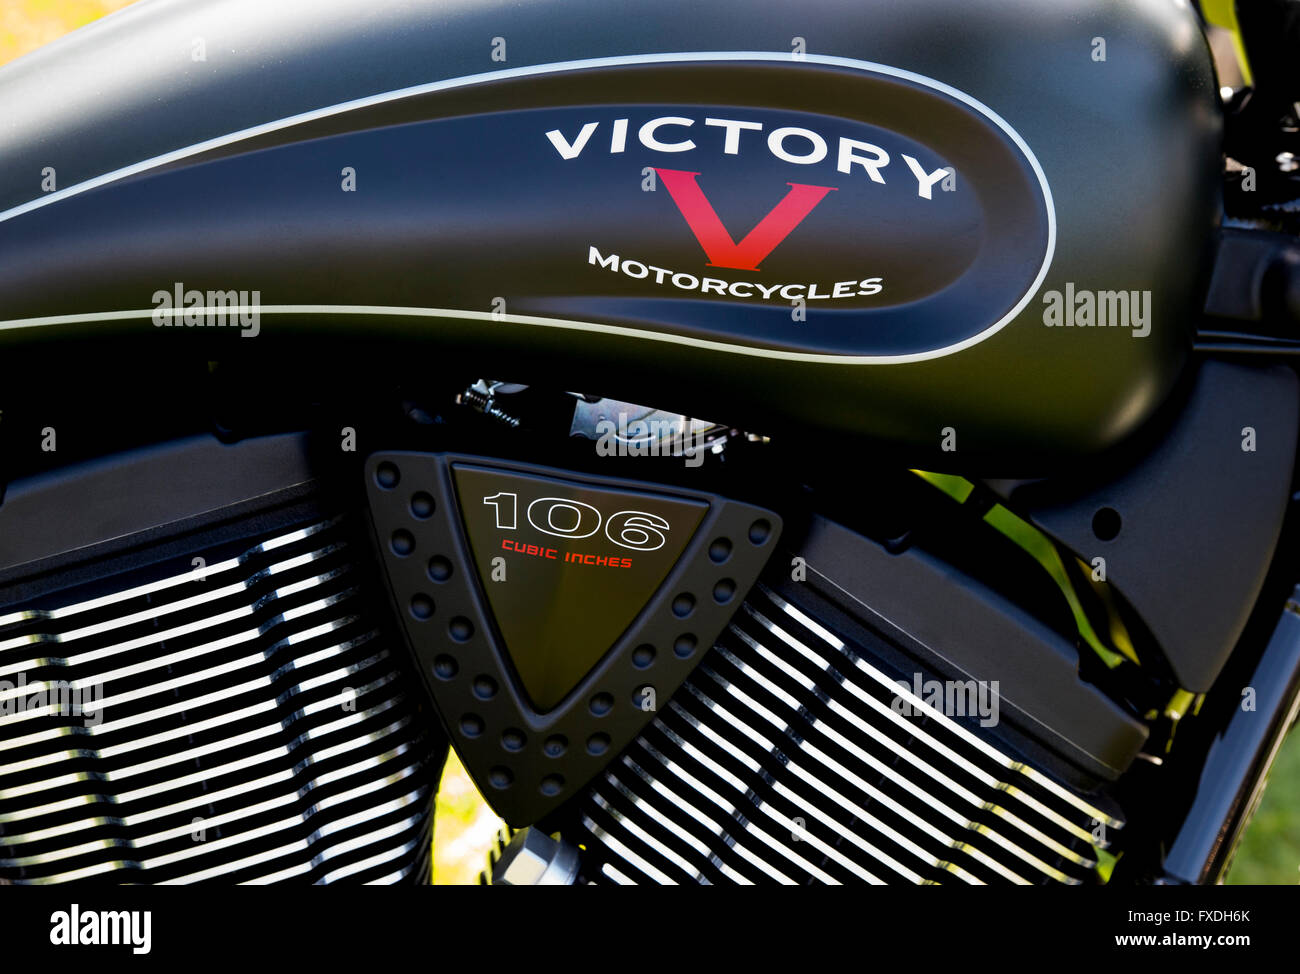 Victory motorcycle. American motorcycle Stock Photo